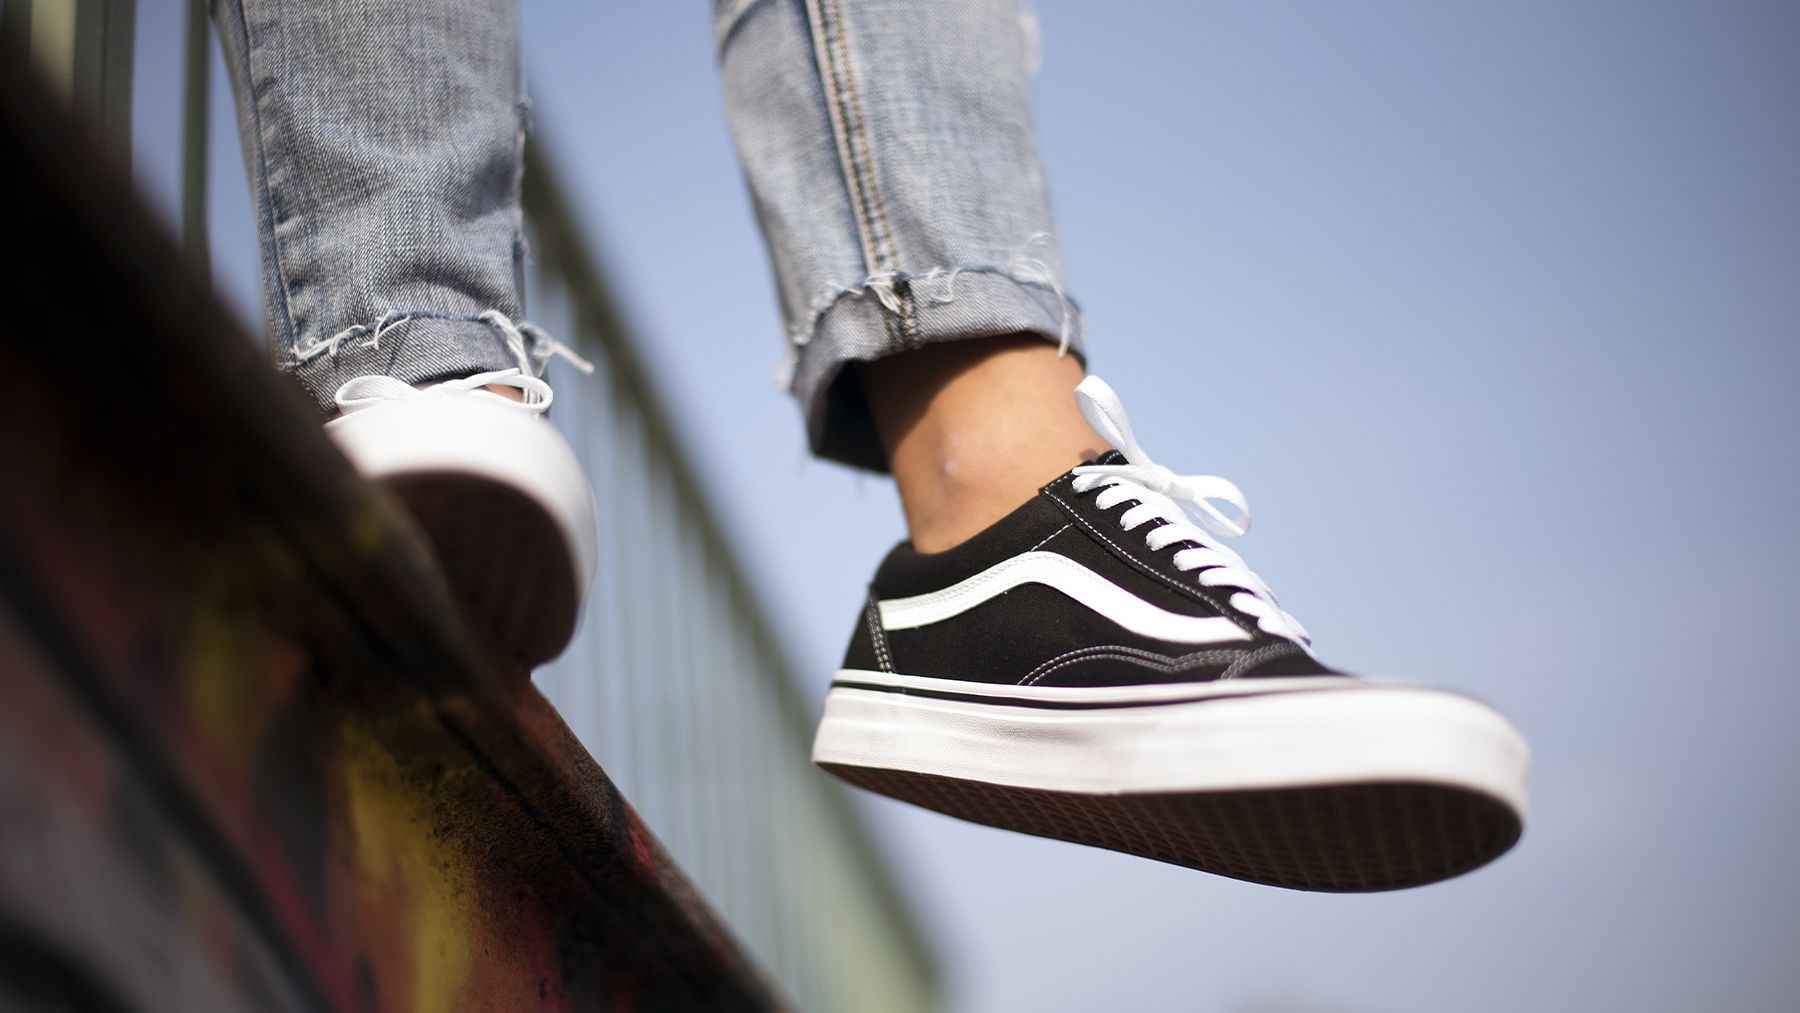 Vans Owner VF Corp. Appoints Bracken Darrell as CEO